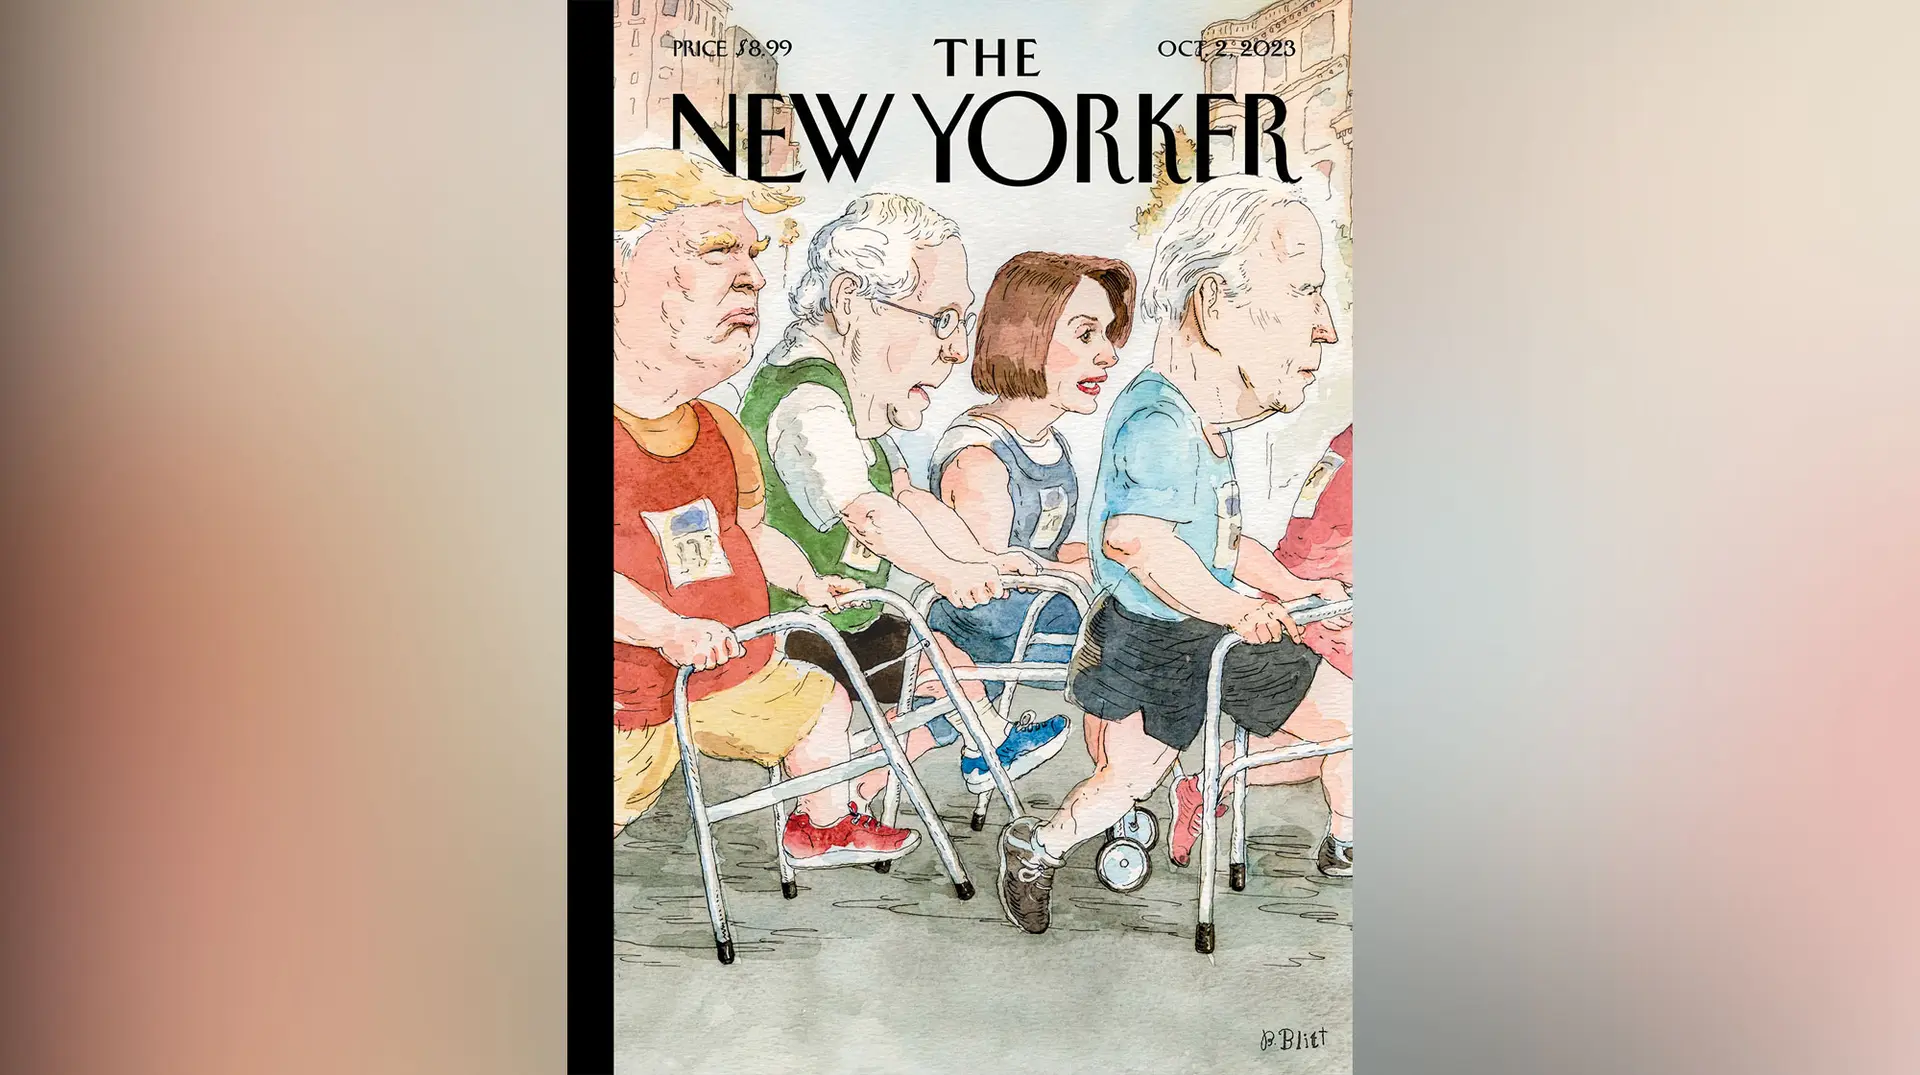 New cartoon for The New Yorker sparks controversy with its ‘ageist’ depictions of the four politicians